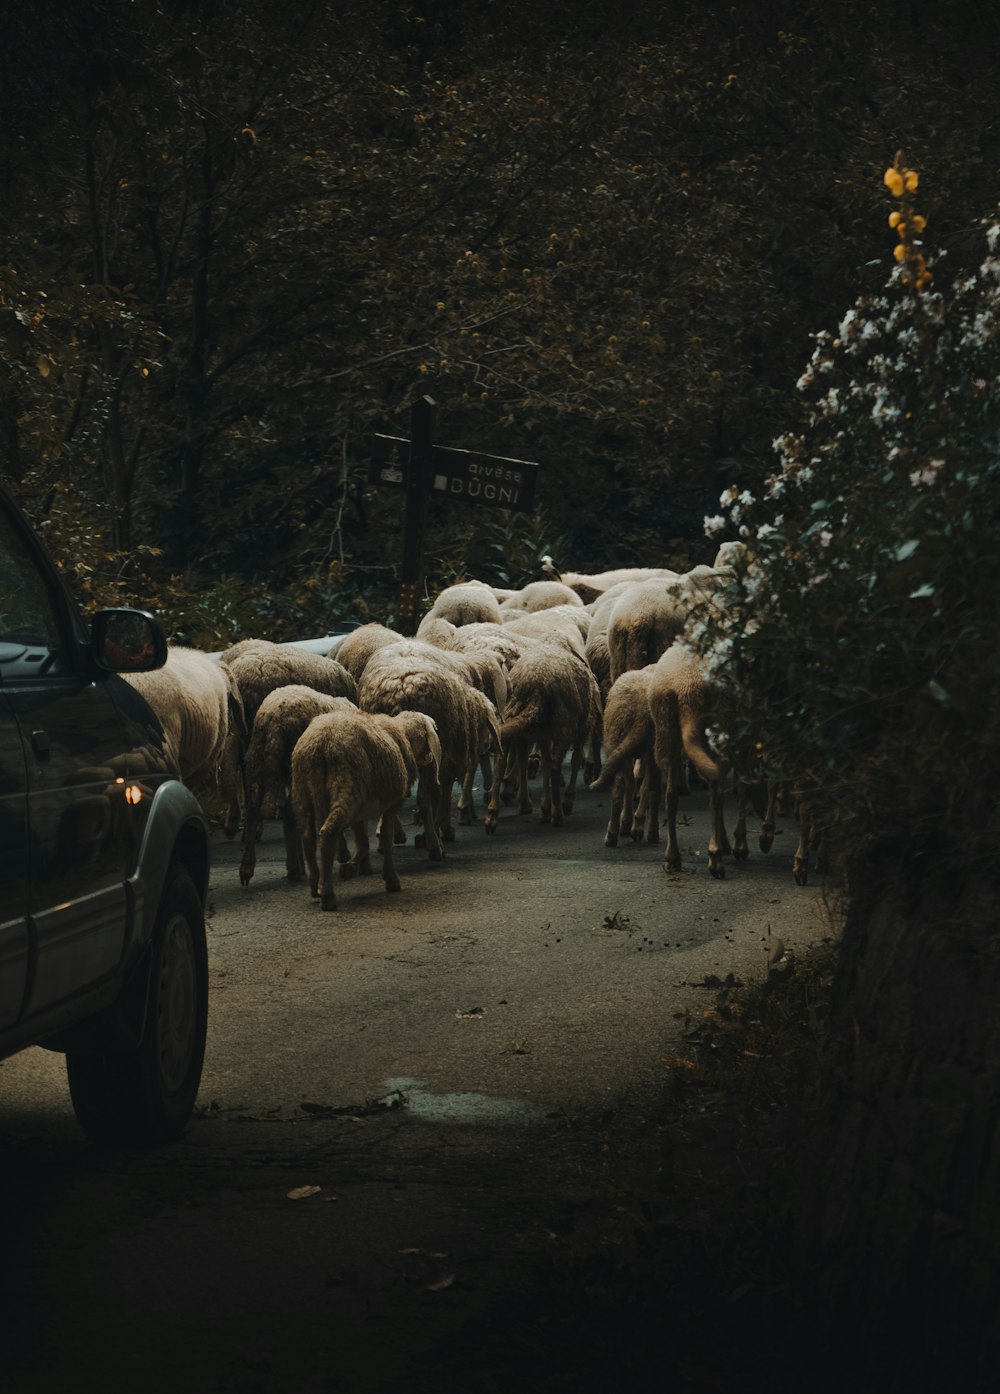 car in front of the heard of animals